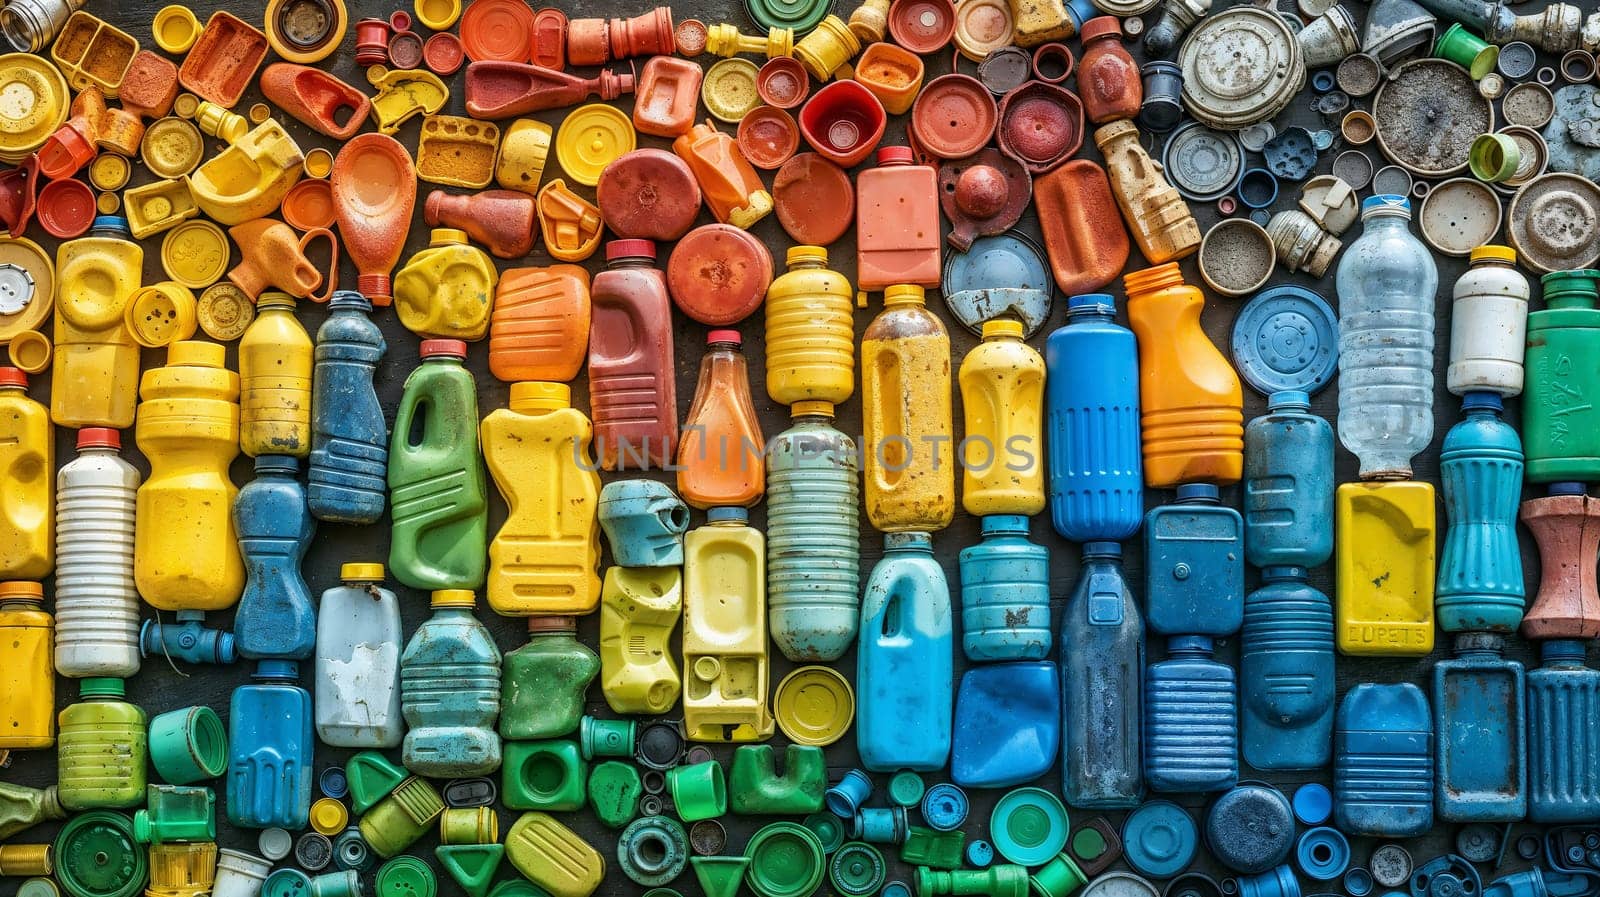 Colorful Assortment of Recycled Plastic Bottles and Caps by chrisroll